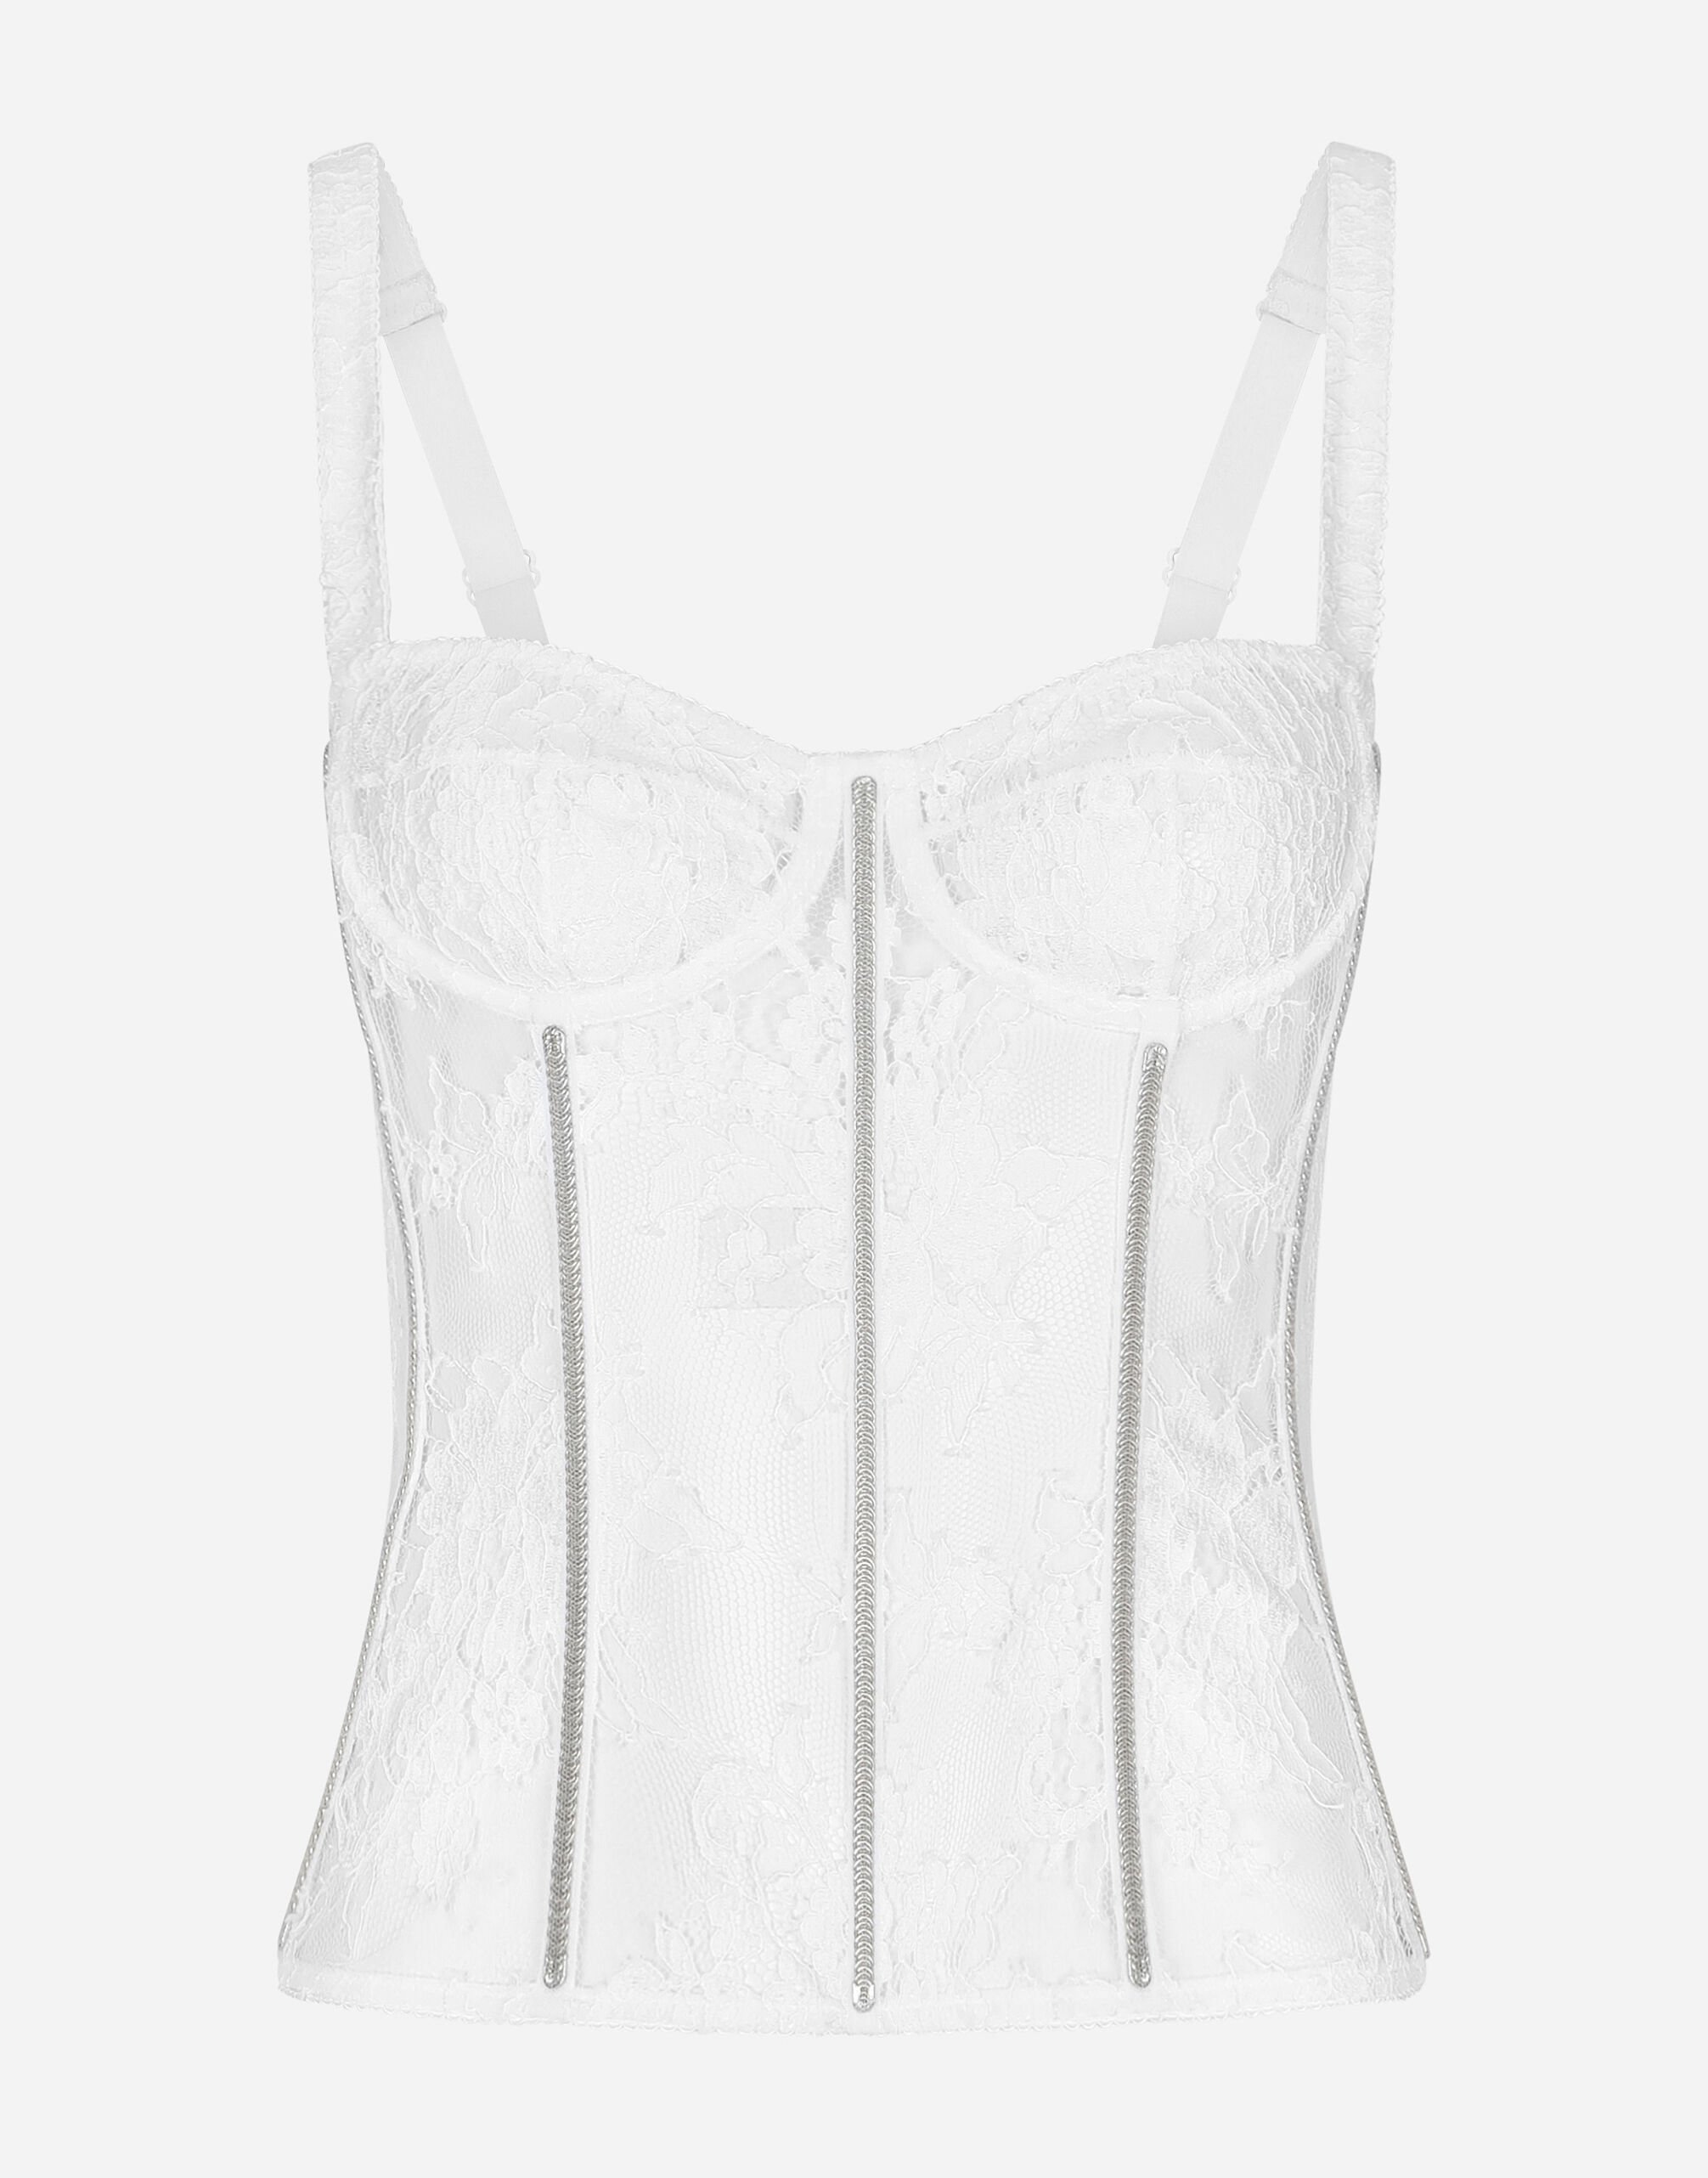 Dolce & Gabbana Lace lingerie bustier with straps Silver O2E28TFUGRA